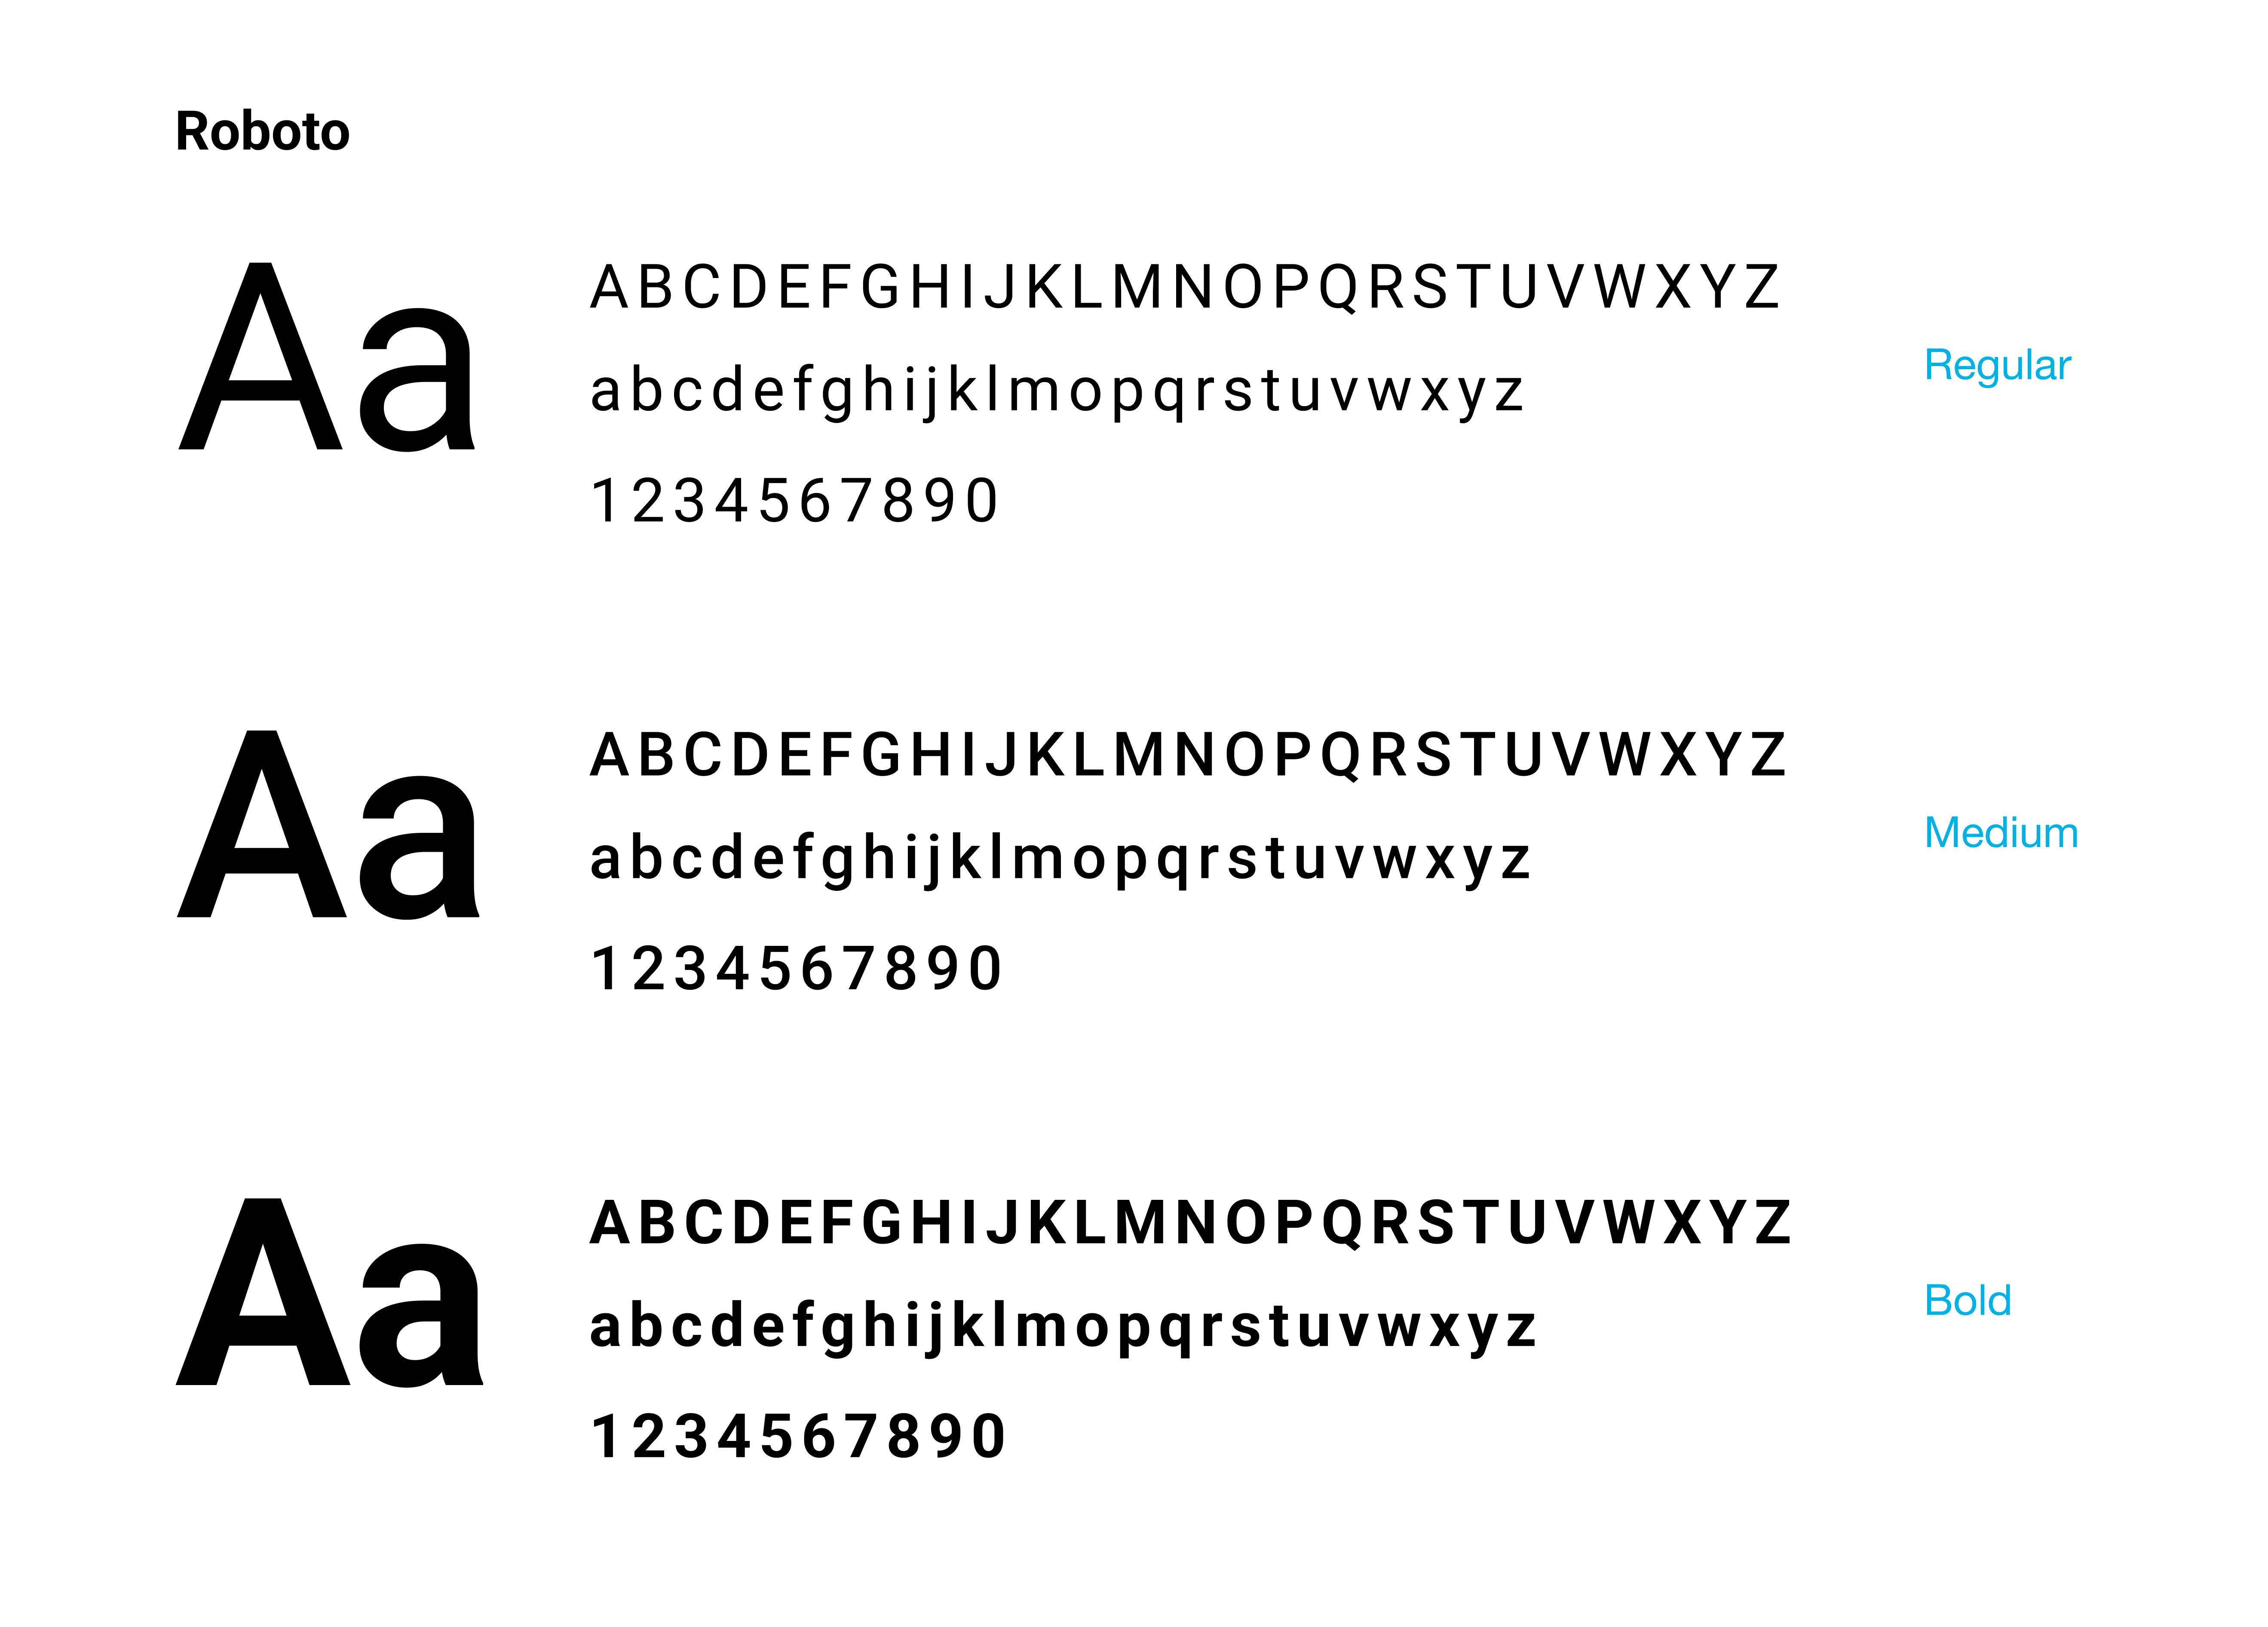 Image displaying the three Roboto font weights.